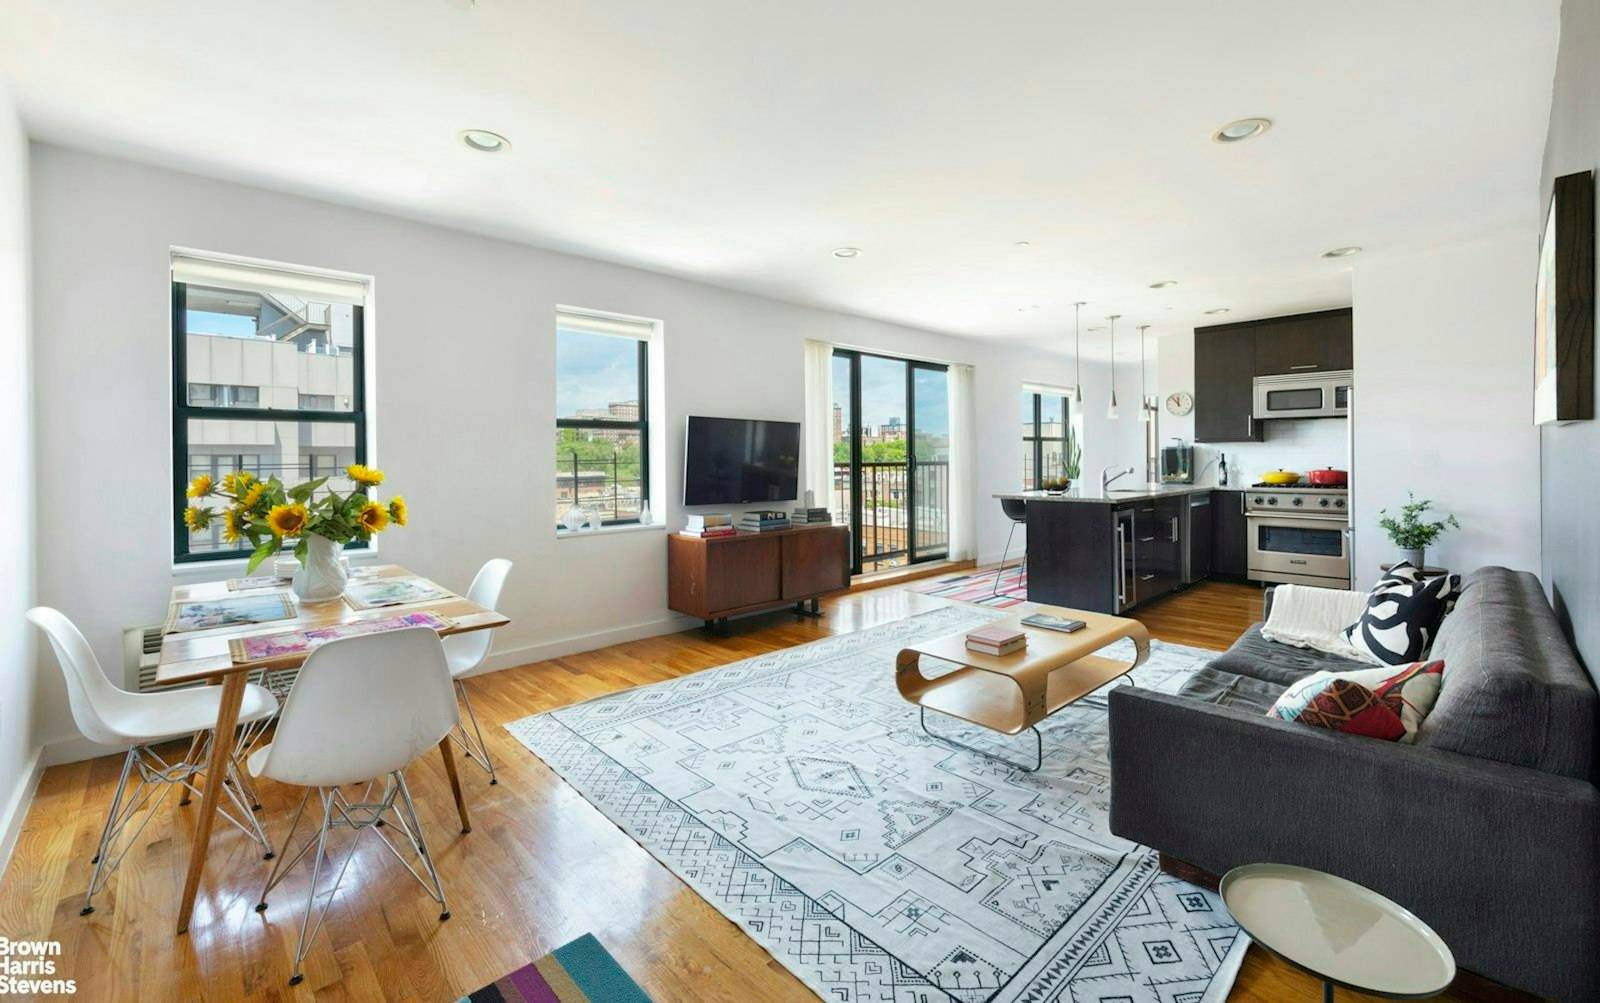 The Real Deal An Honest 3 Bedroom Condo in the in the Heart of Harlem You Can Afford !